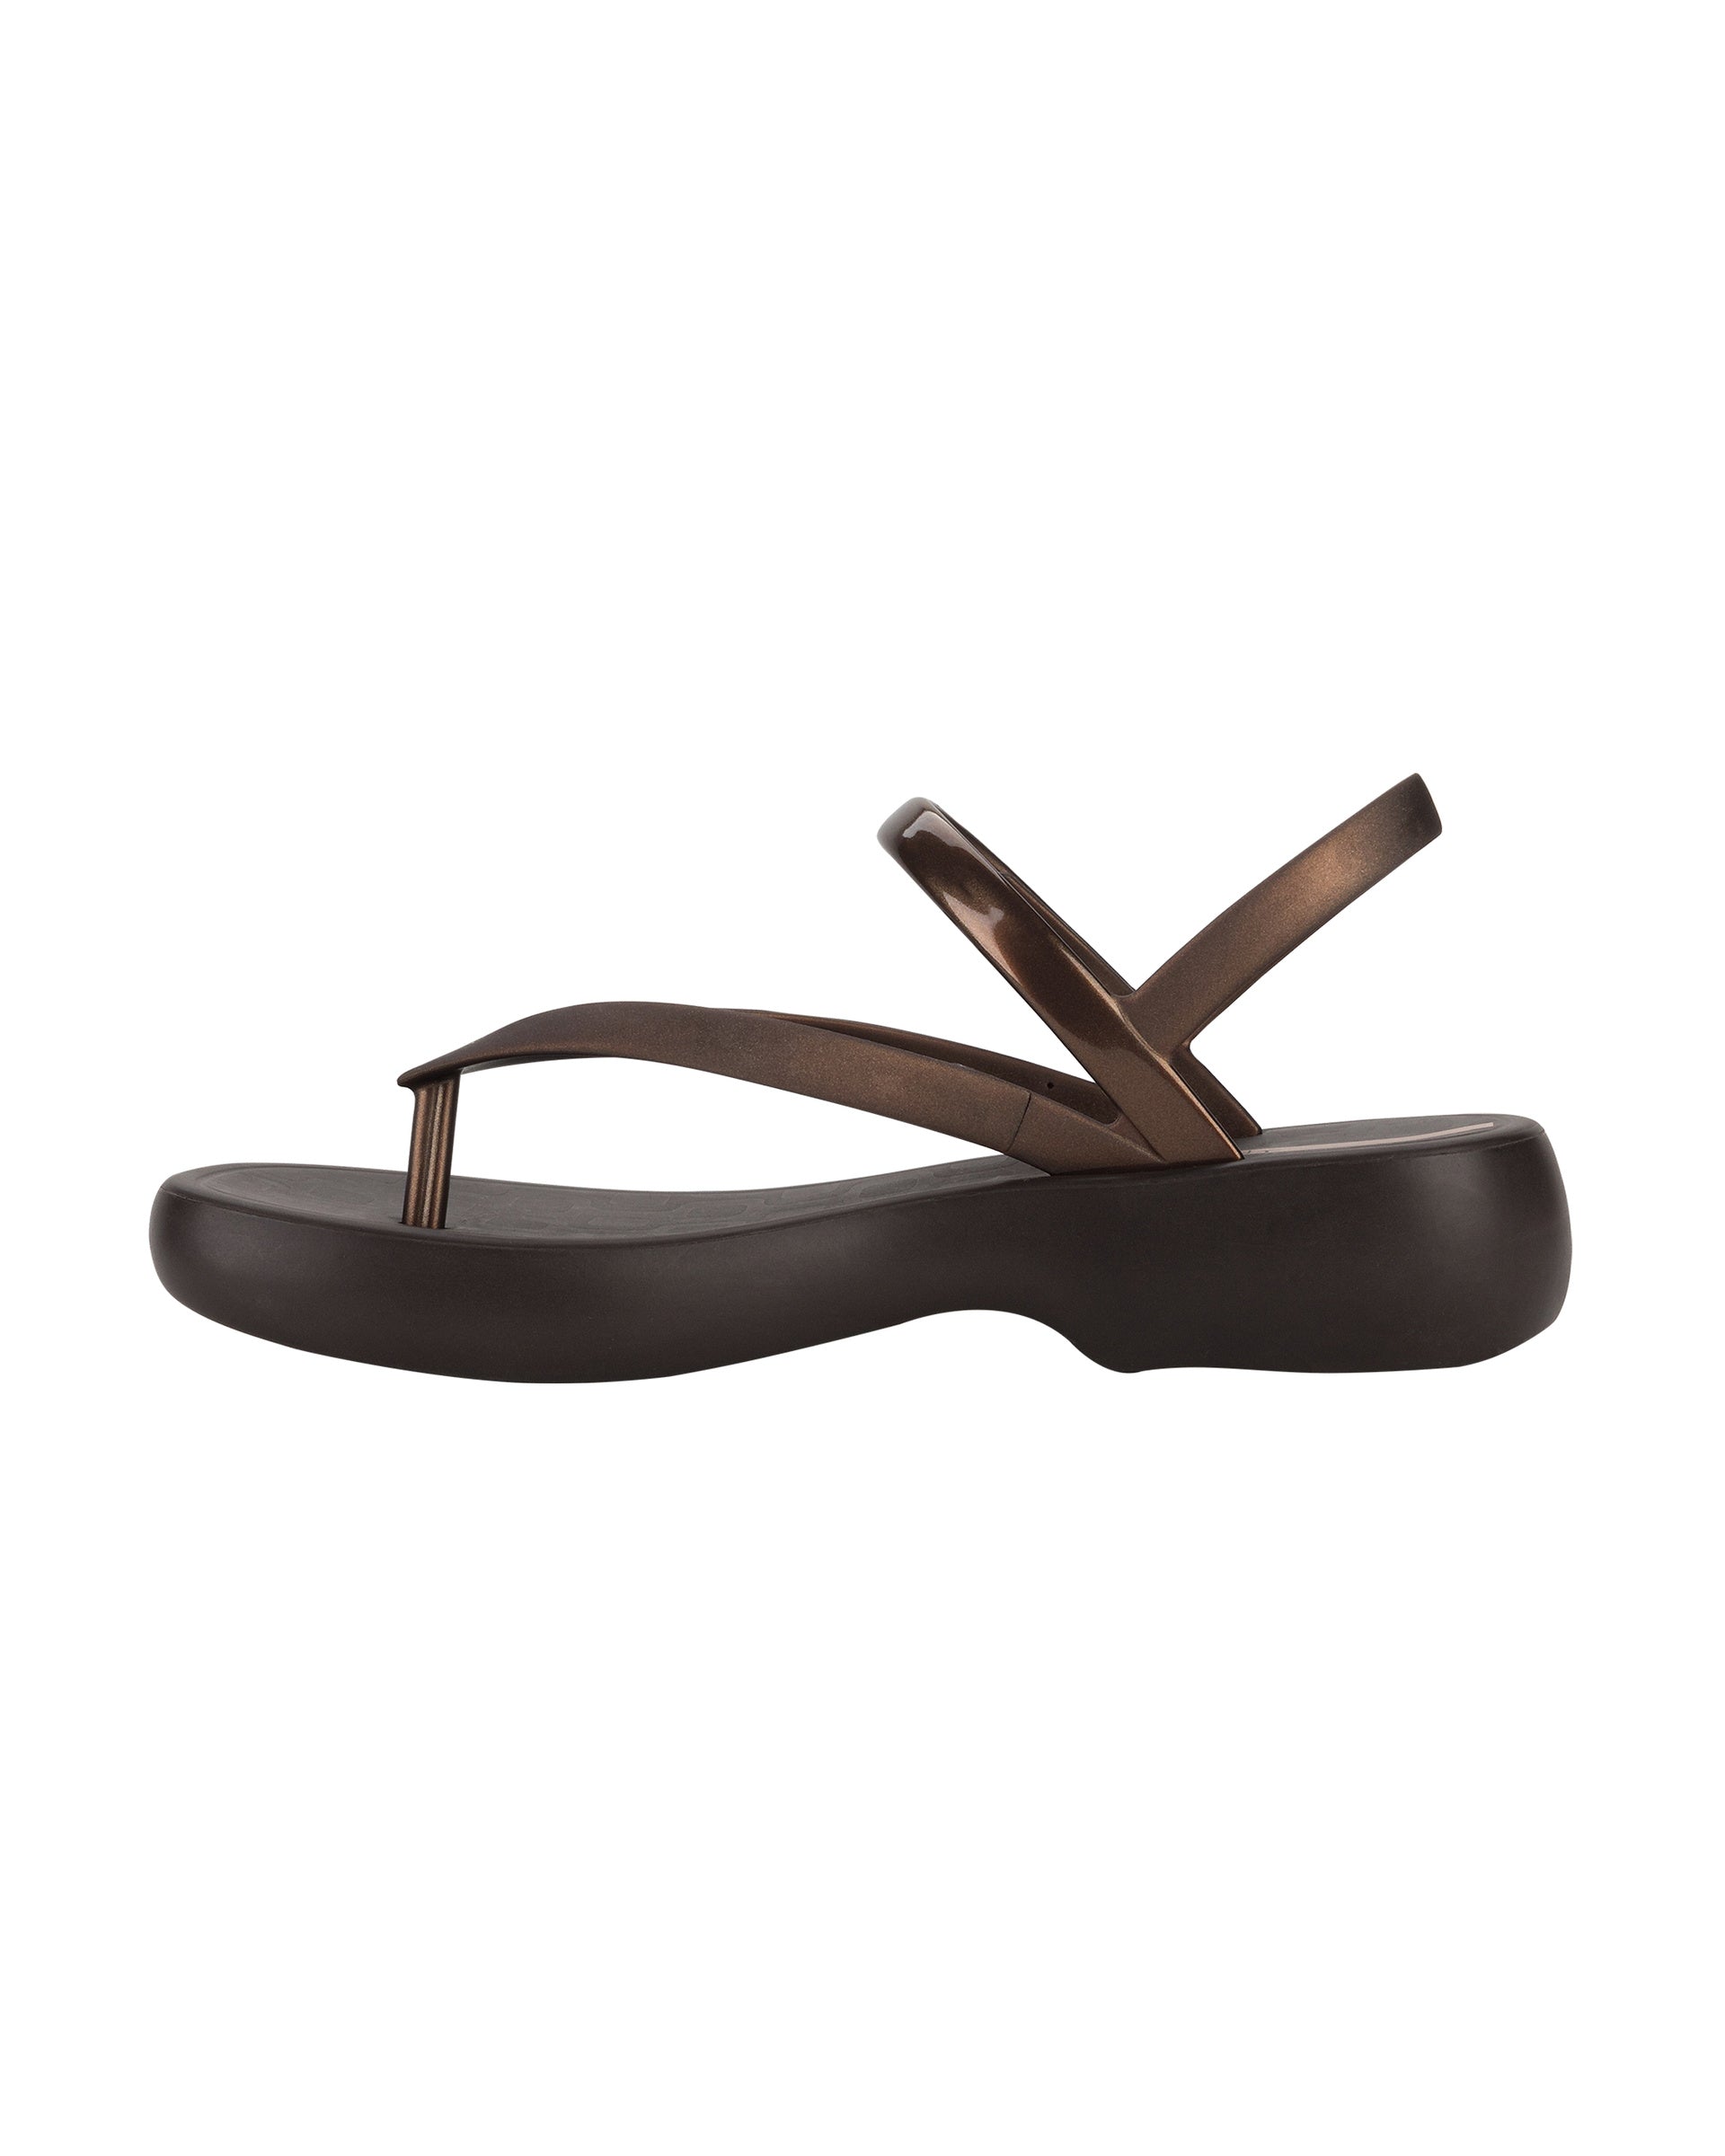 Inner side view of a brown Ipanema Verano women's sandal.